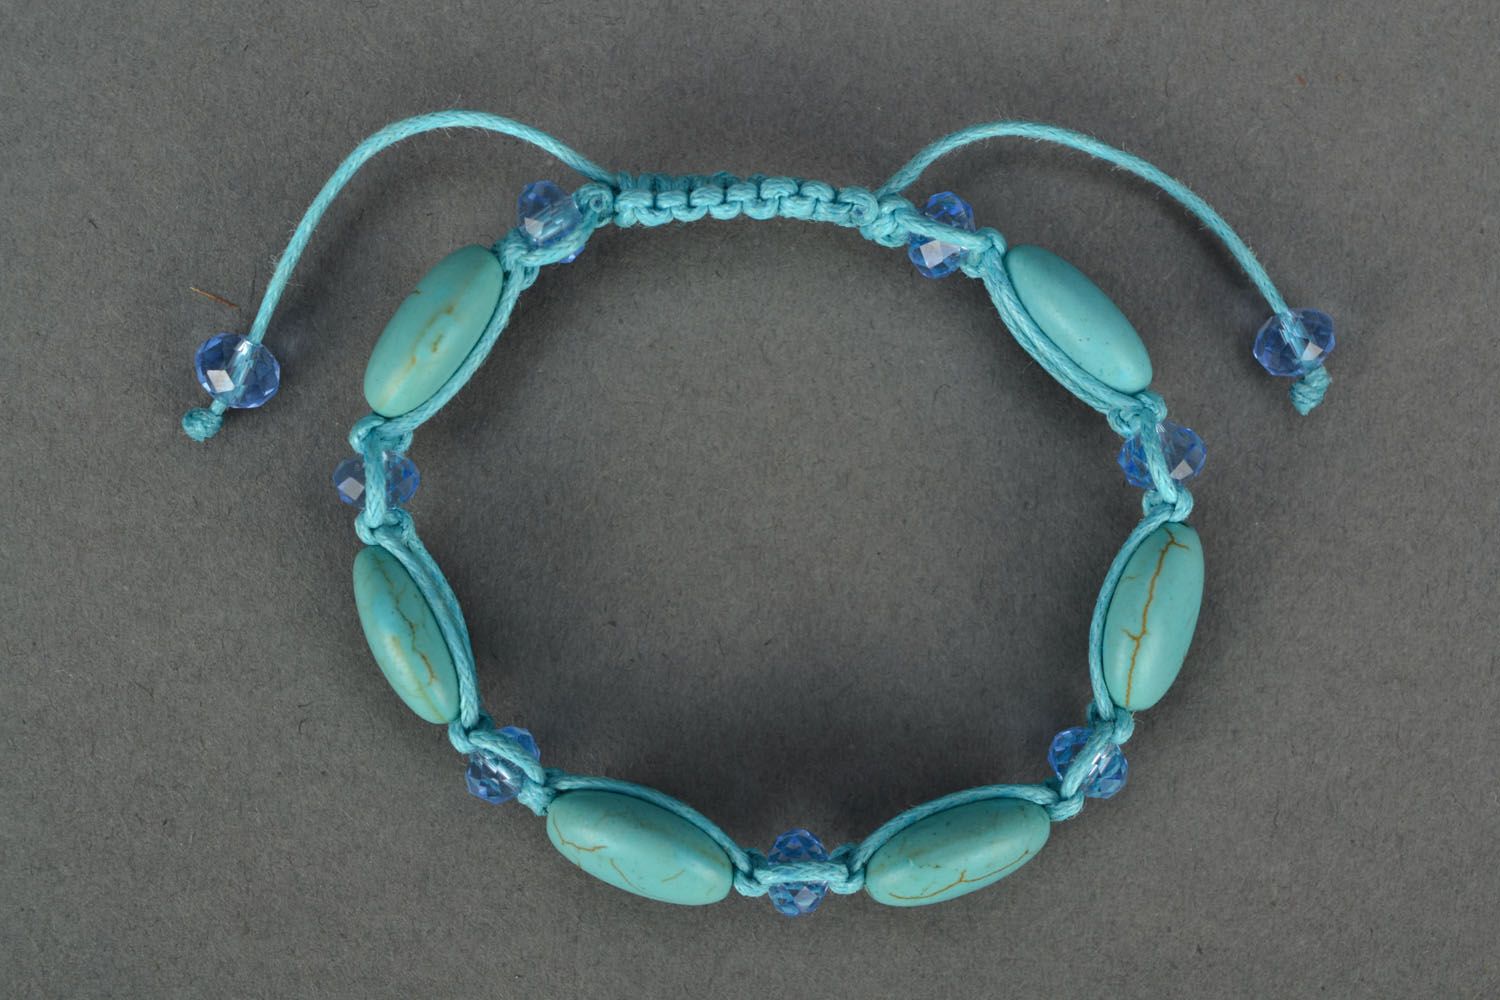 Bracelet woven of beads and cord photo 2